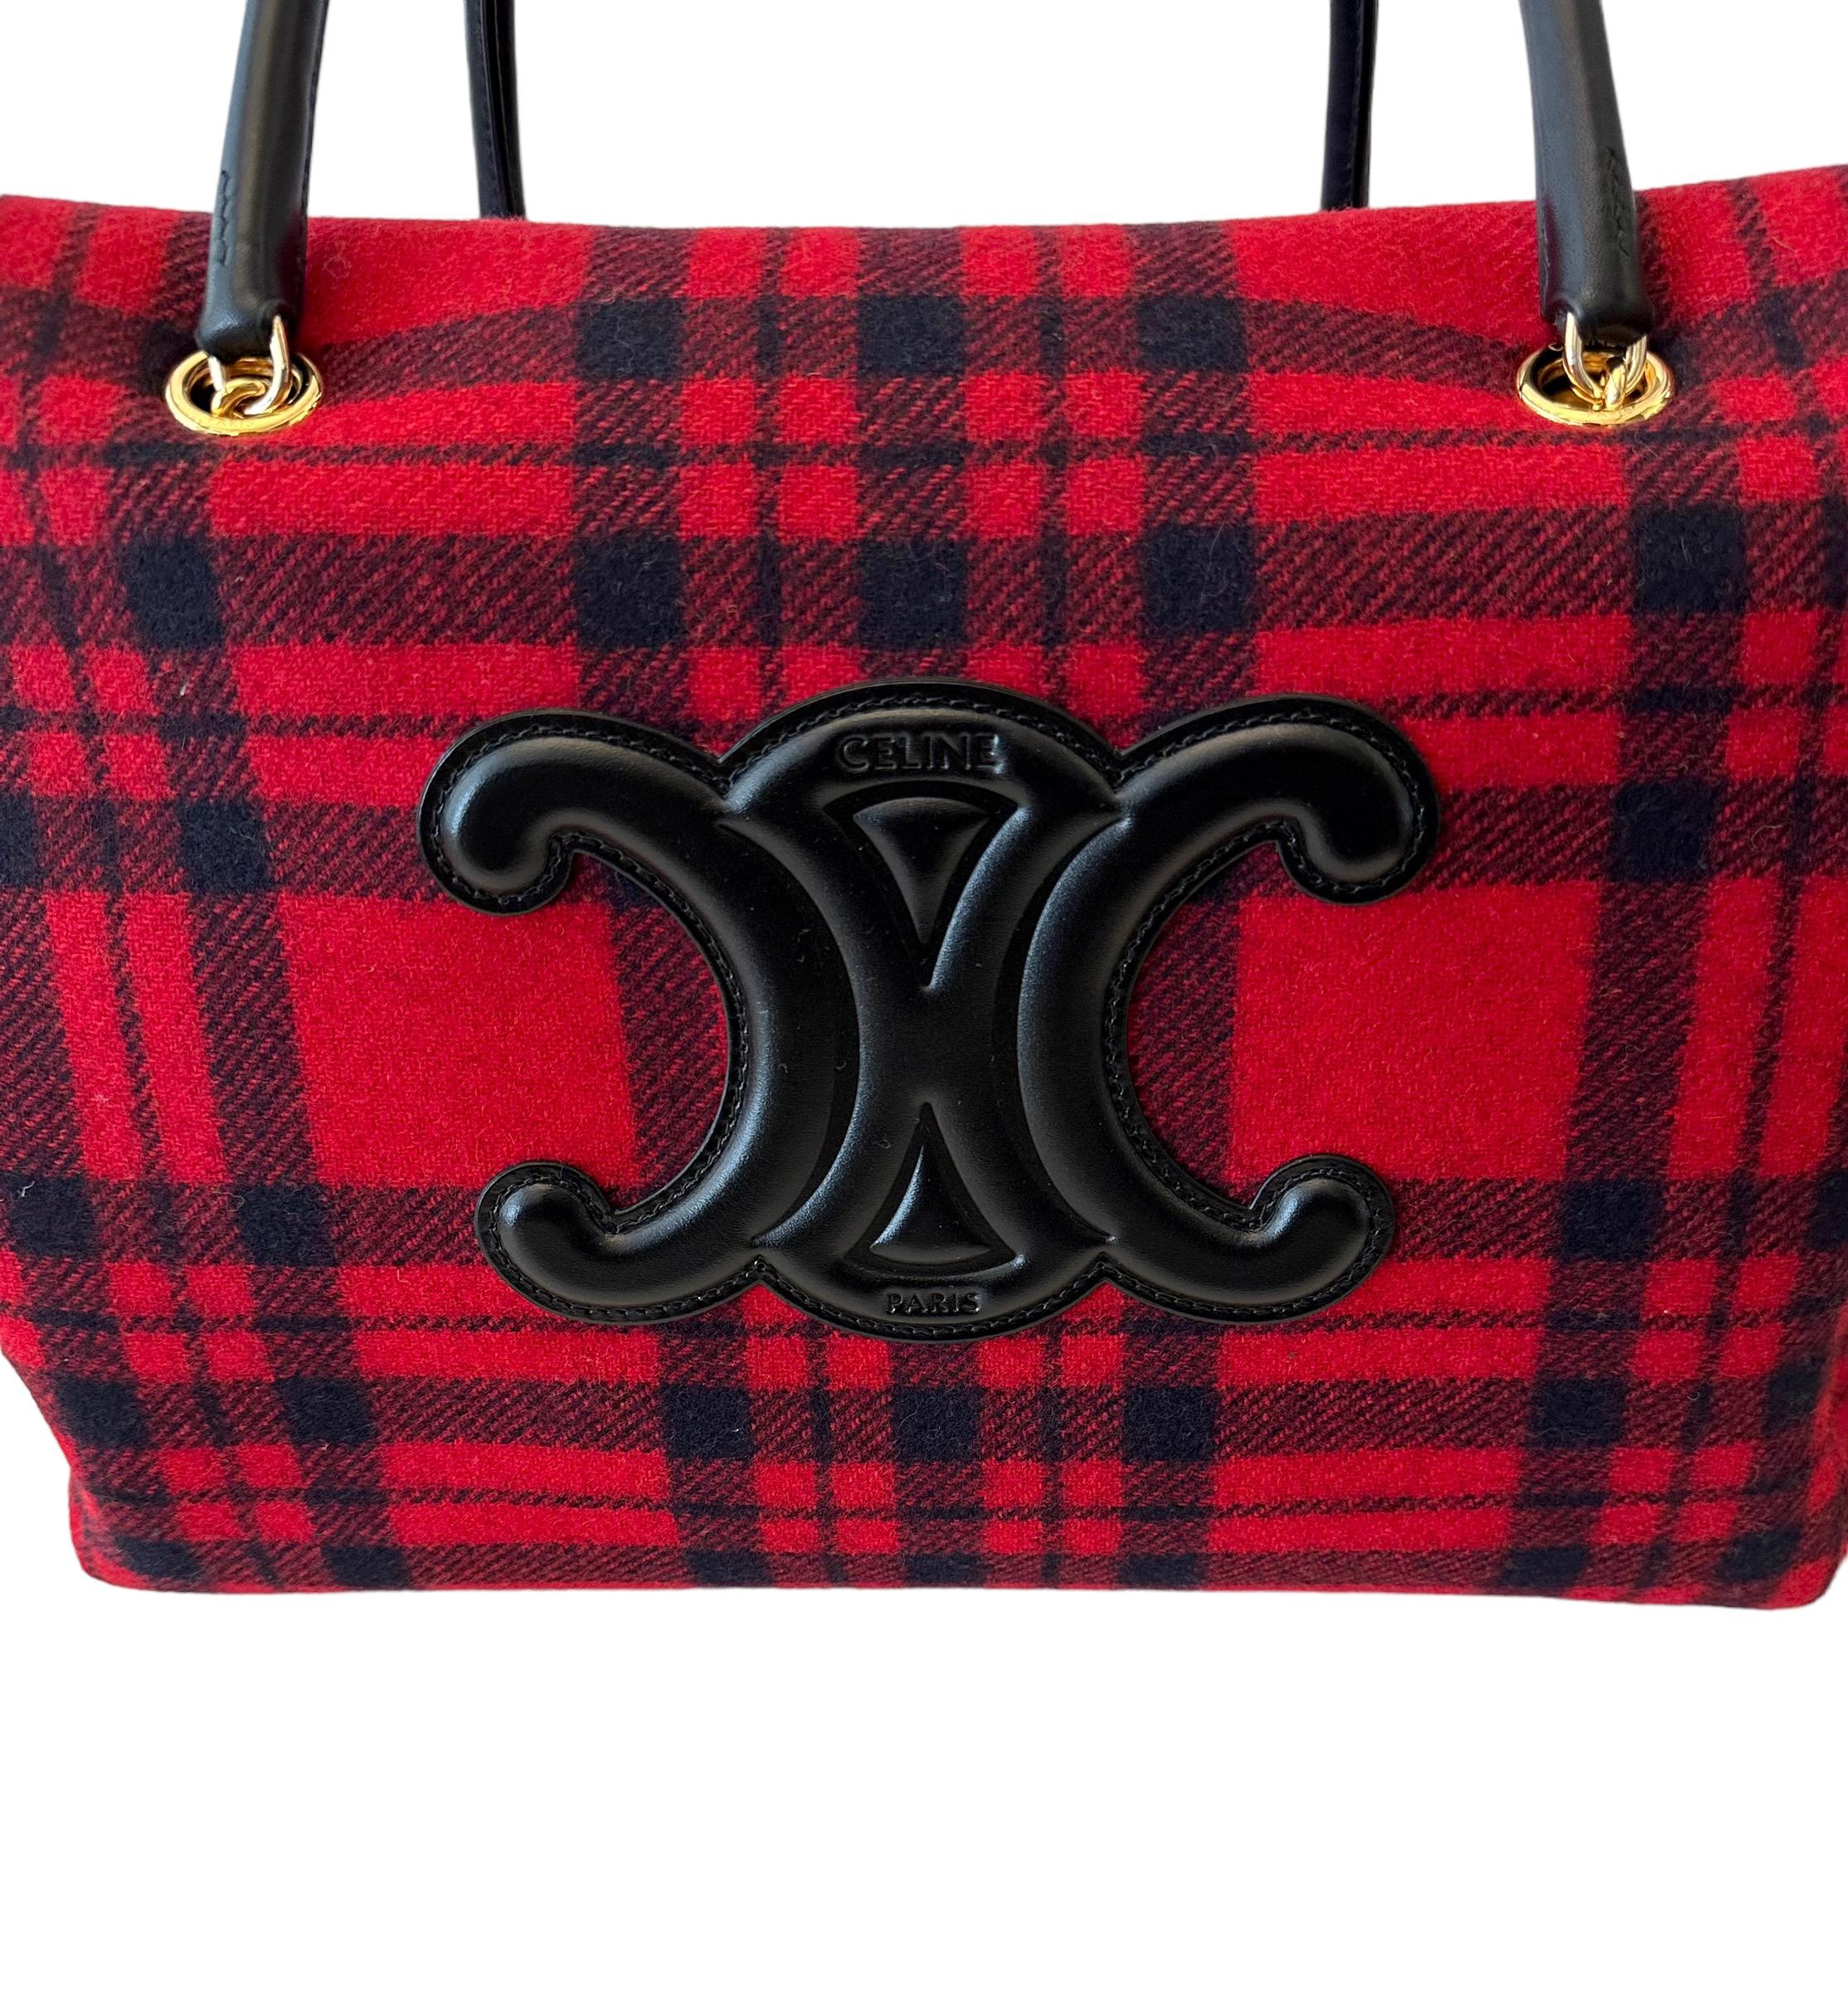 Created by Hedi Slimane for Céline in 2021, this tote bag is crafted in a black and red wool tartan fabric.
It features a black calfskin leather oversize logo as well as black calfskin leather handles and a zip closure at the top.
It is perfect